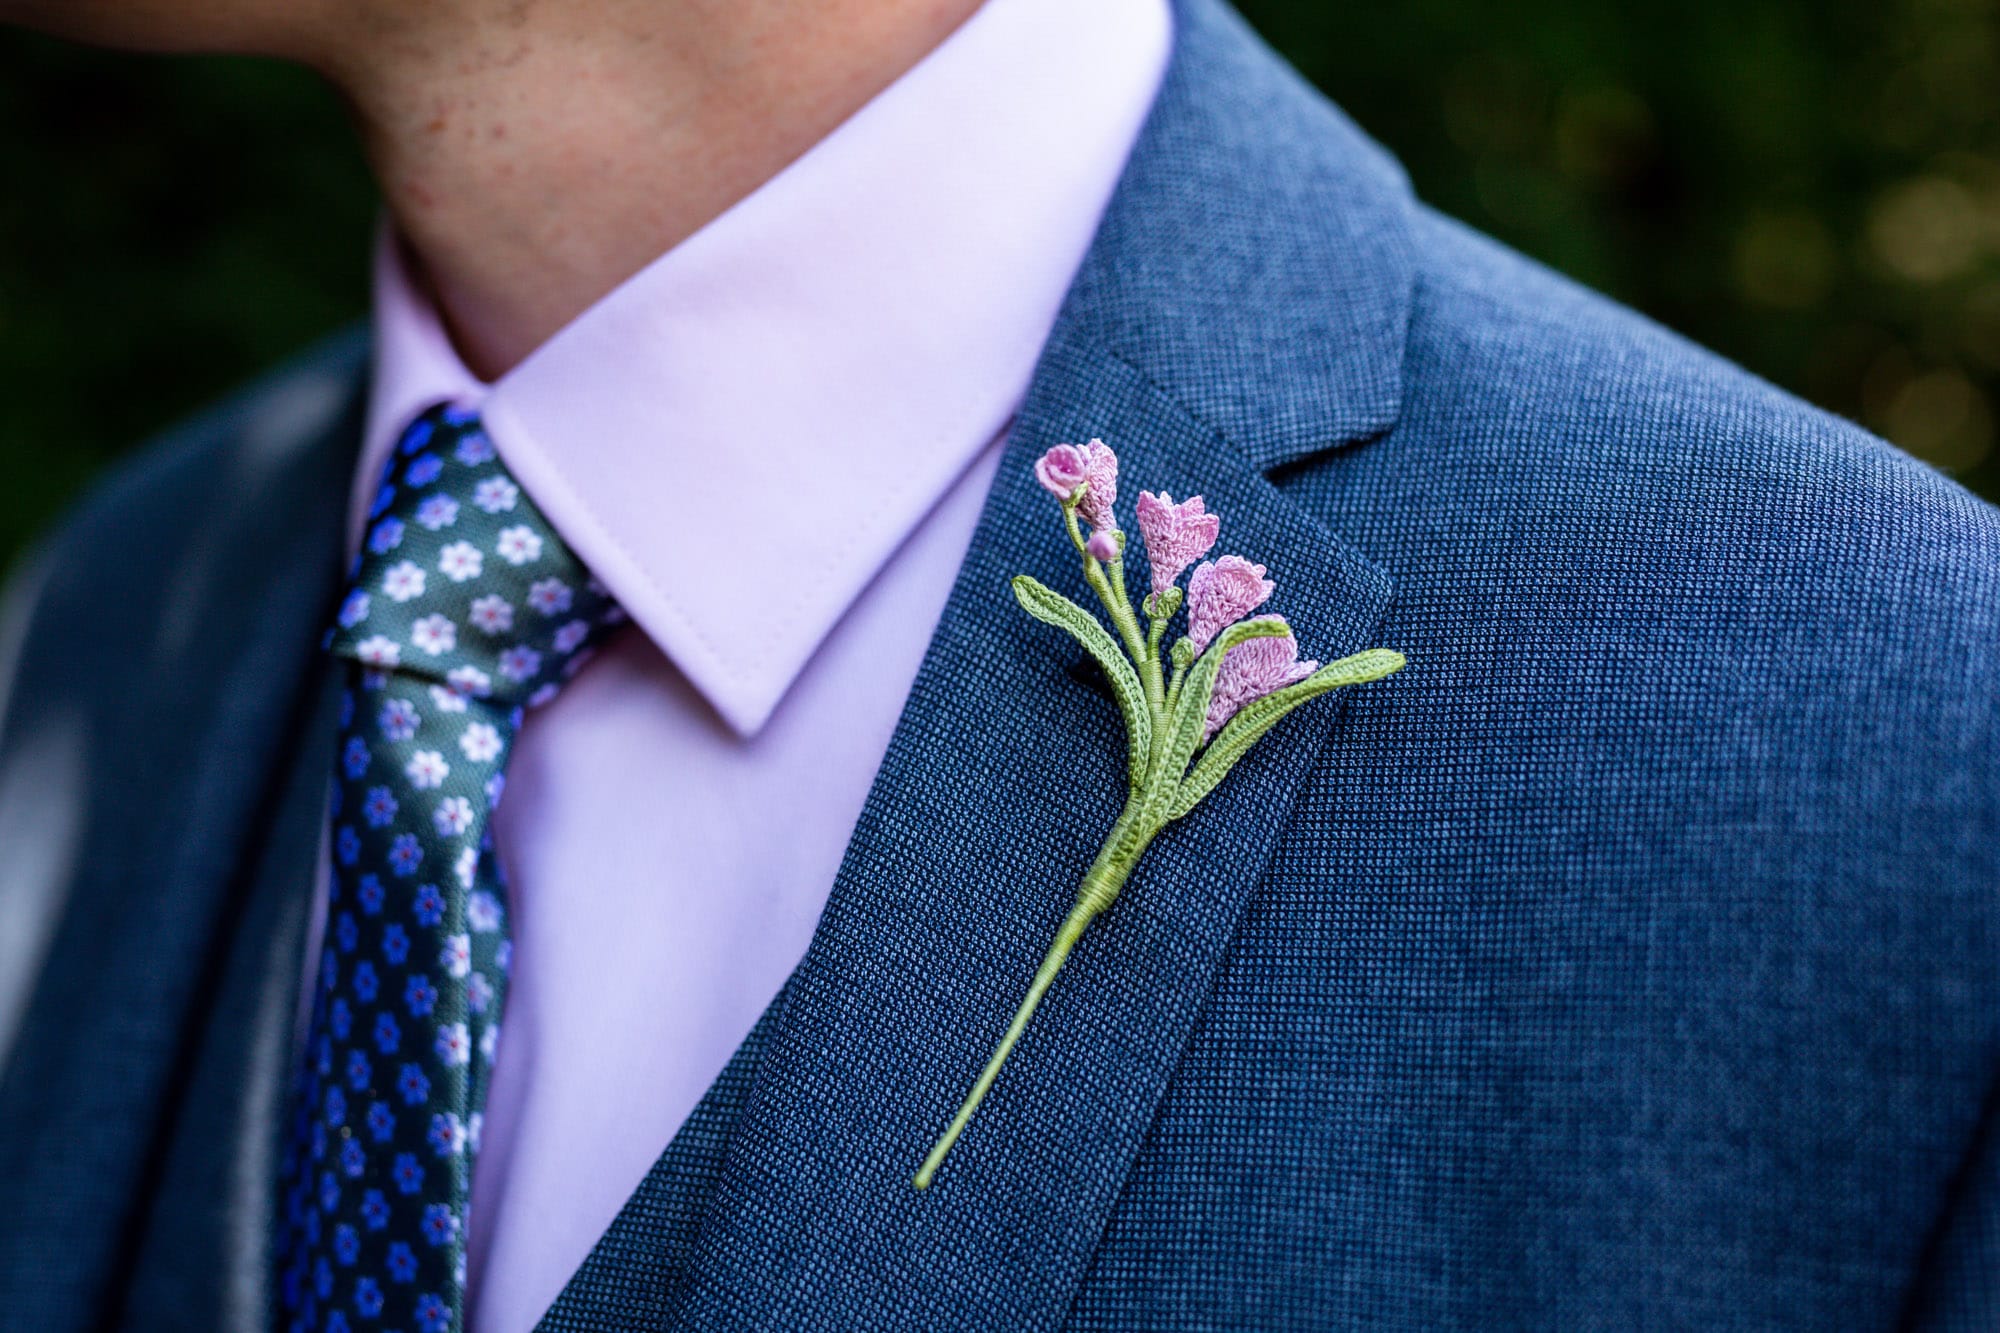 Embroidered wedding flower in grooms pocket taken by Bromley wedding photographer